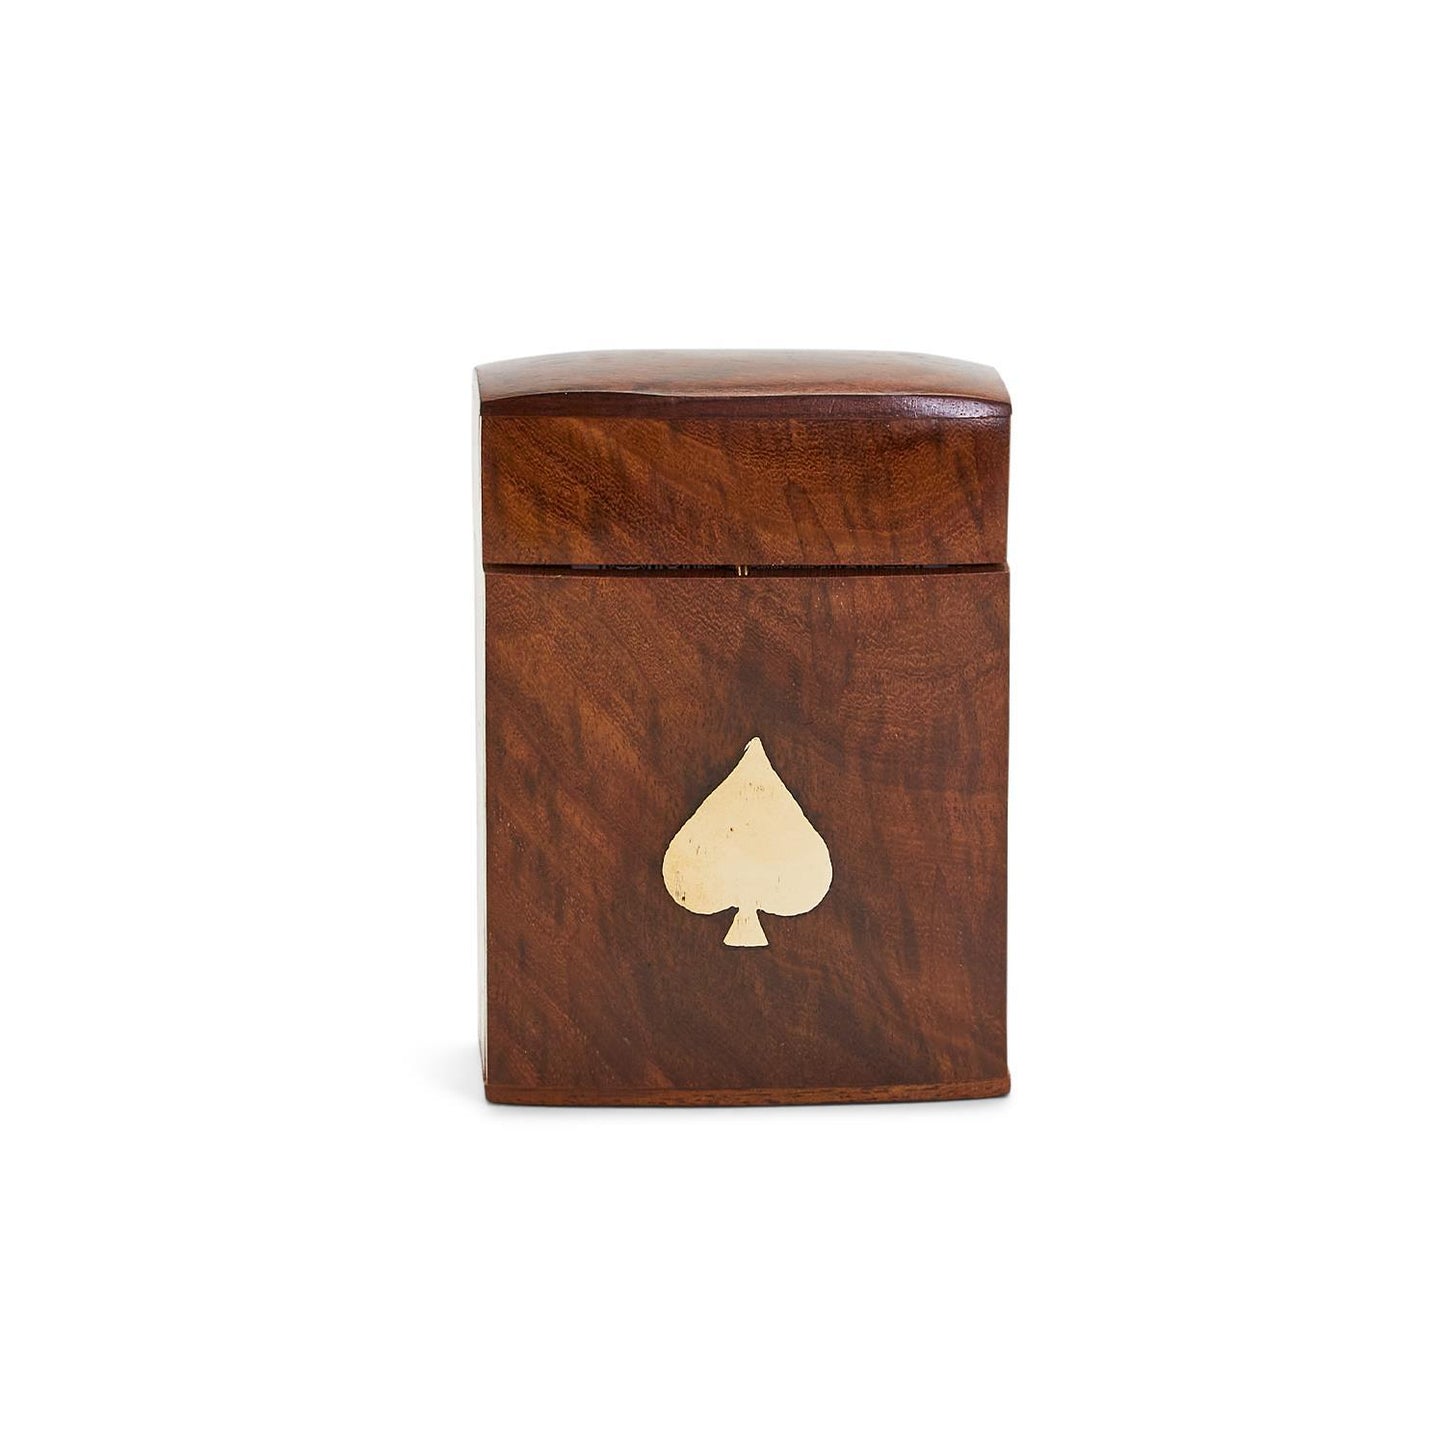 Handcrafted Wooden Playing Card Box with Cards